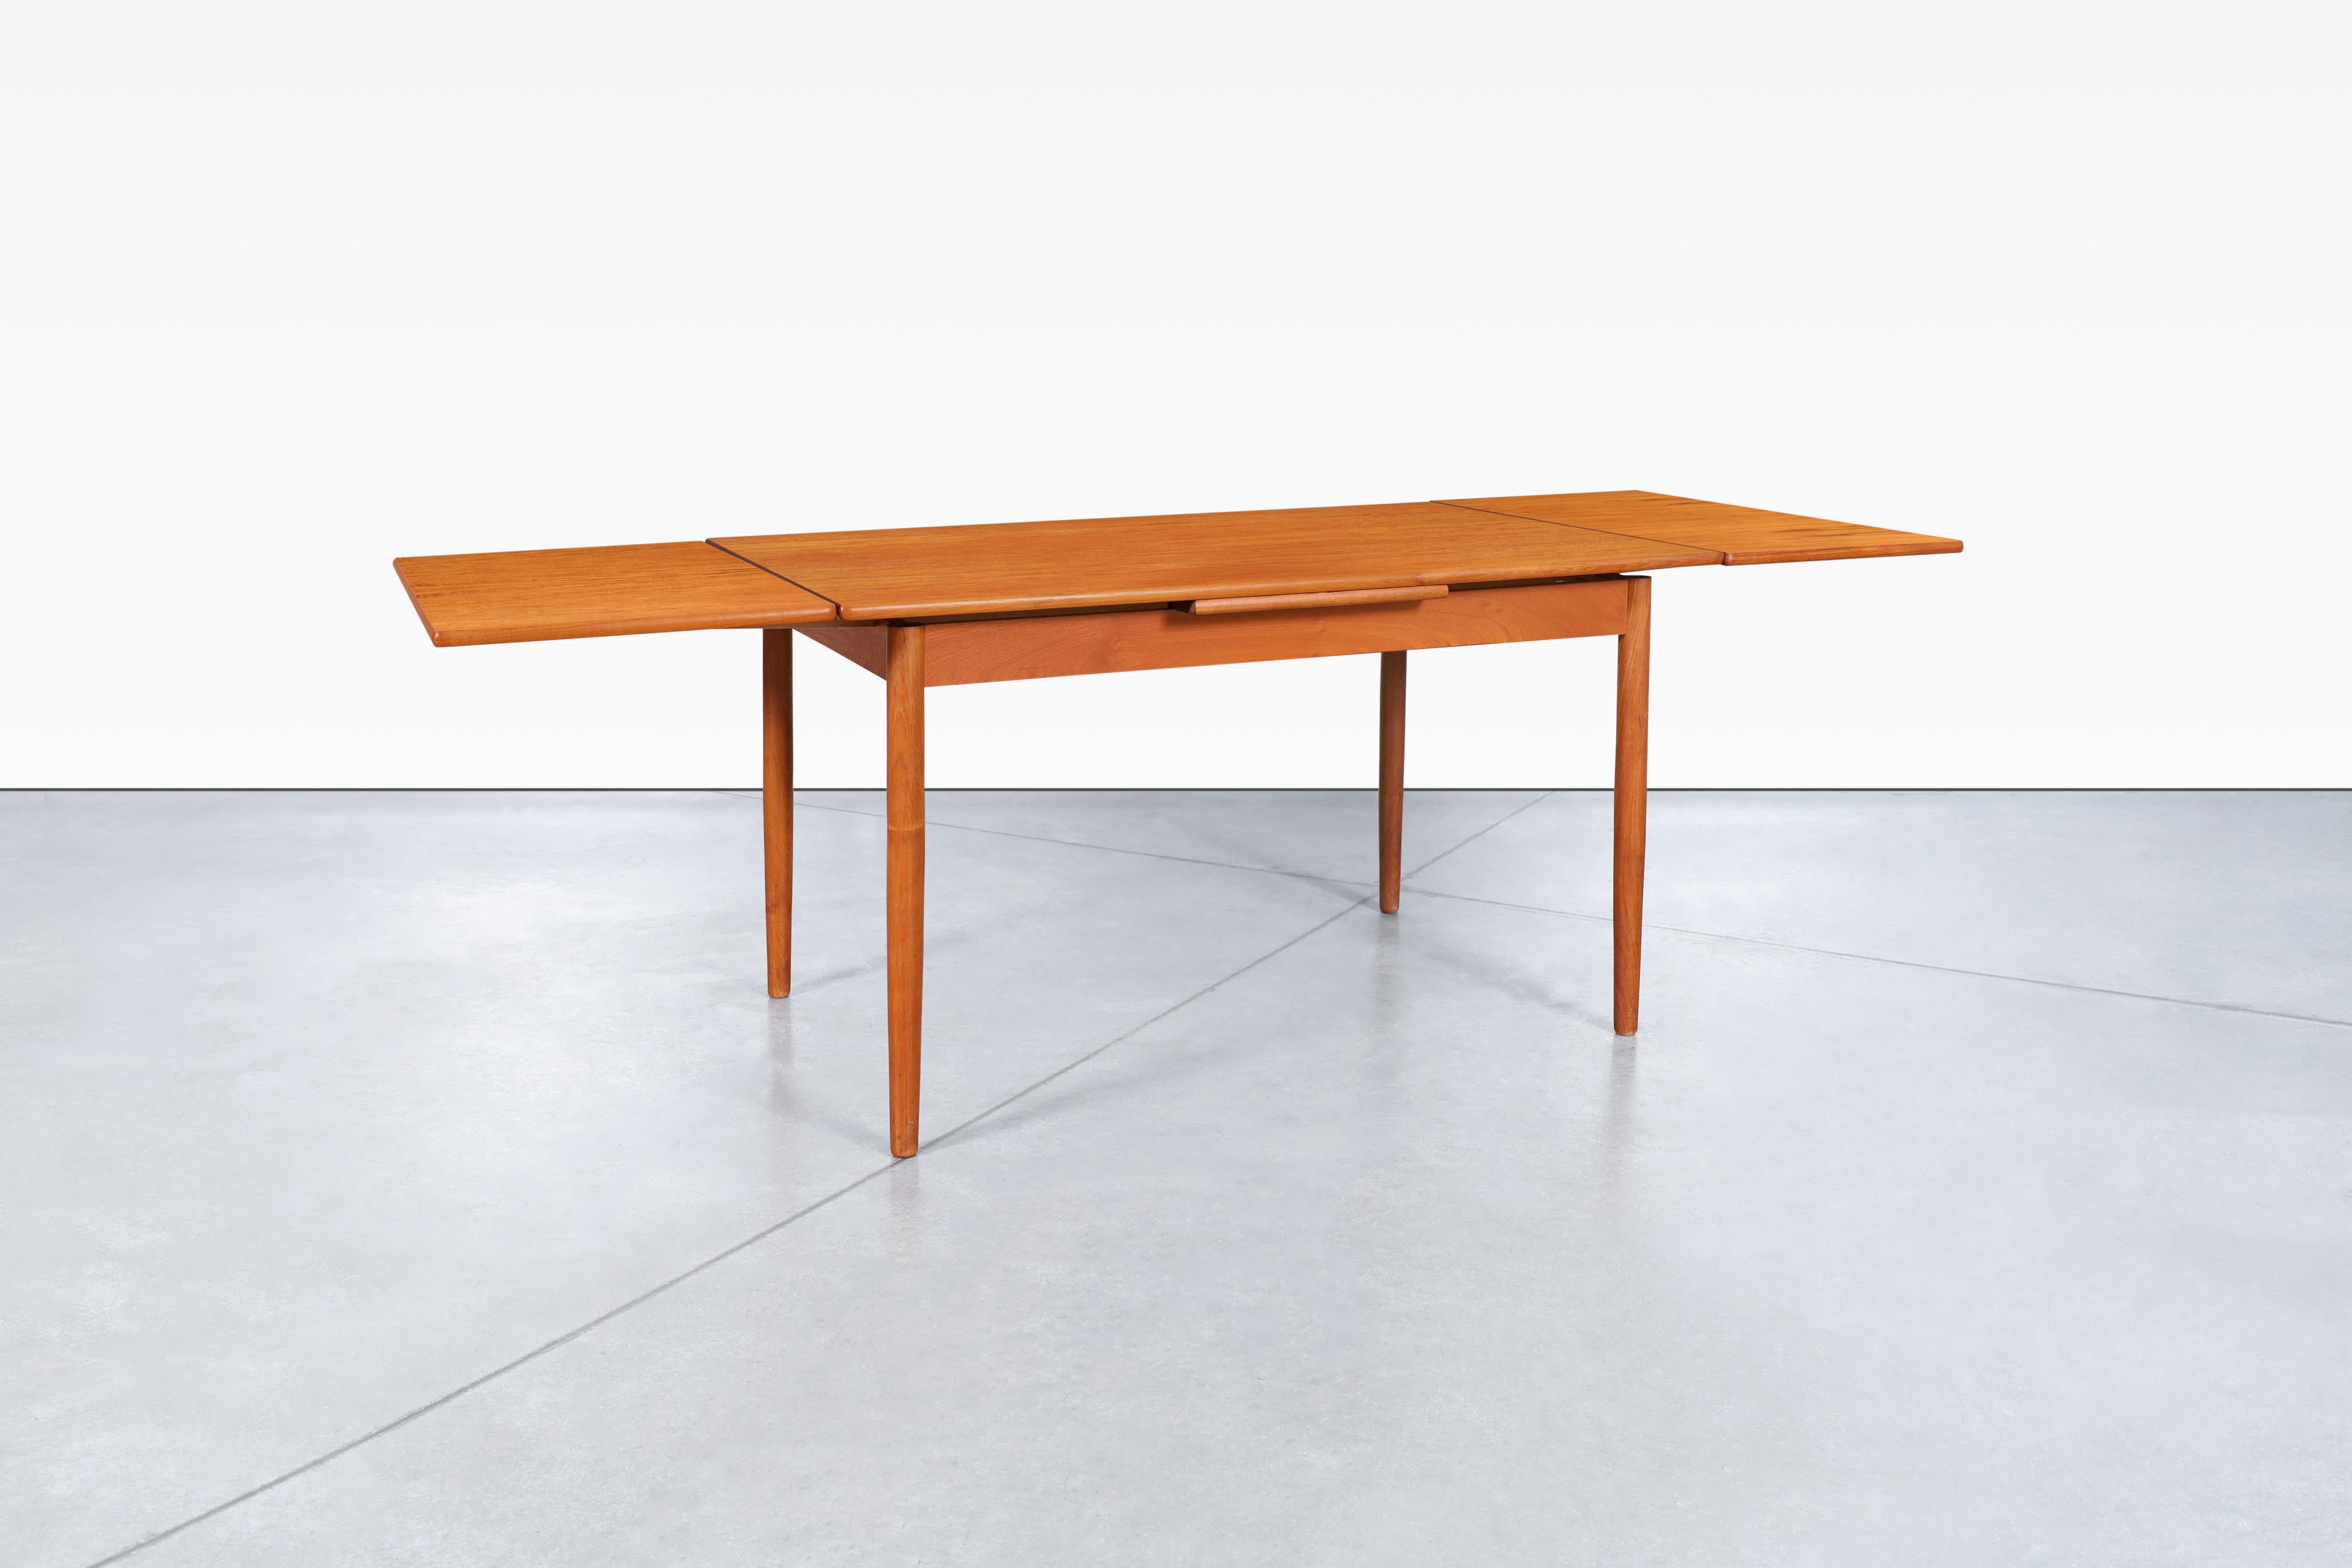 Beautiful Danish modern expanding teak dining table designed by AM Møbler in Denmark, circa 1960s. This dining table is a masterpiece crafted from high-quality teak wood, with its stunning grains beautifully accentuating the top and extensions. Its